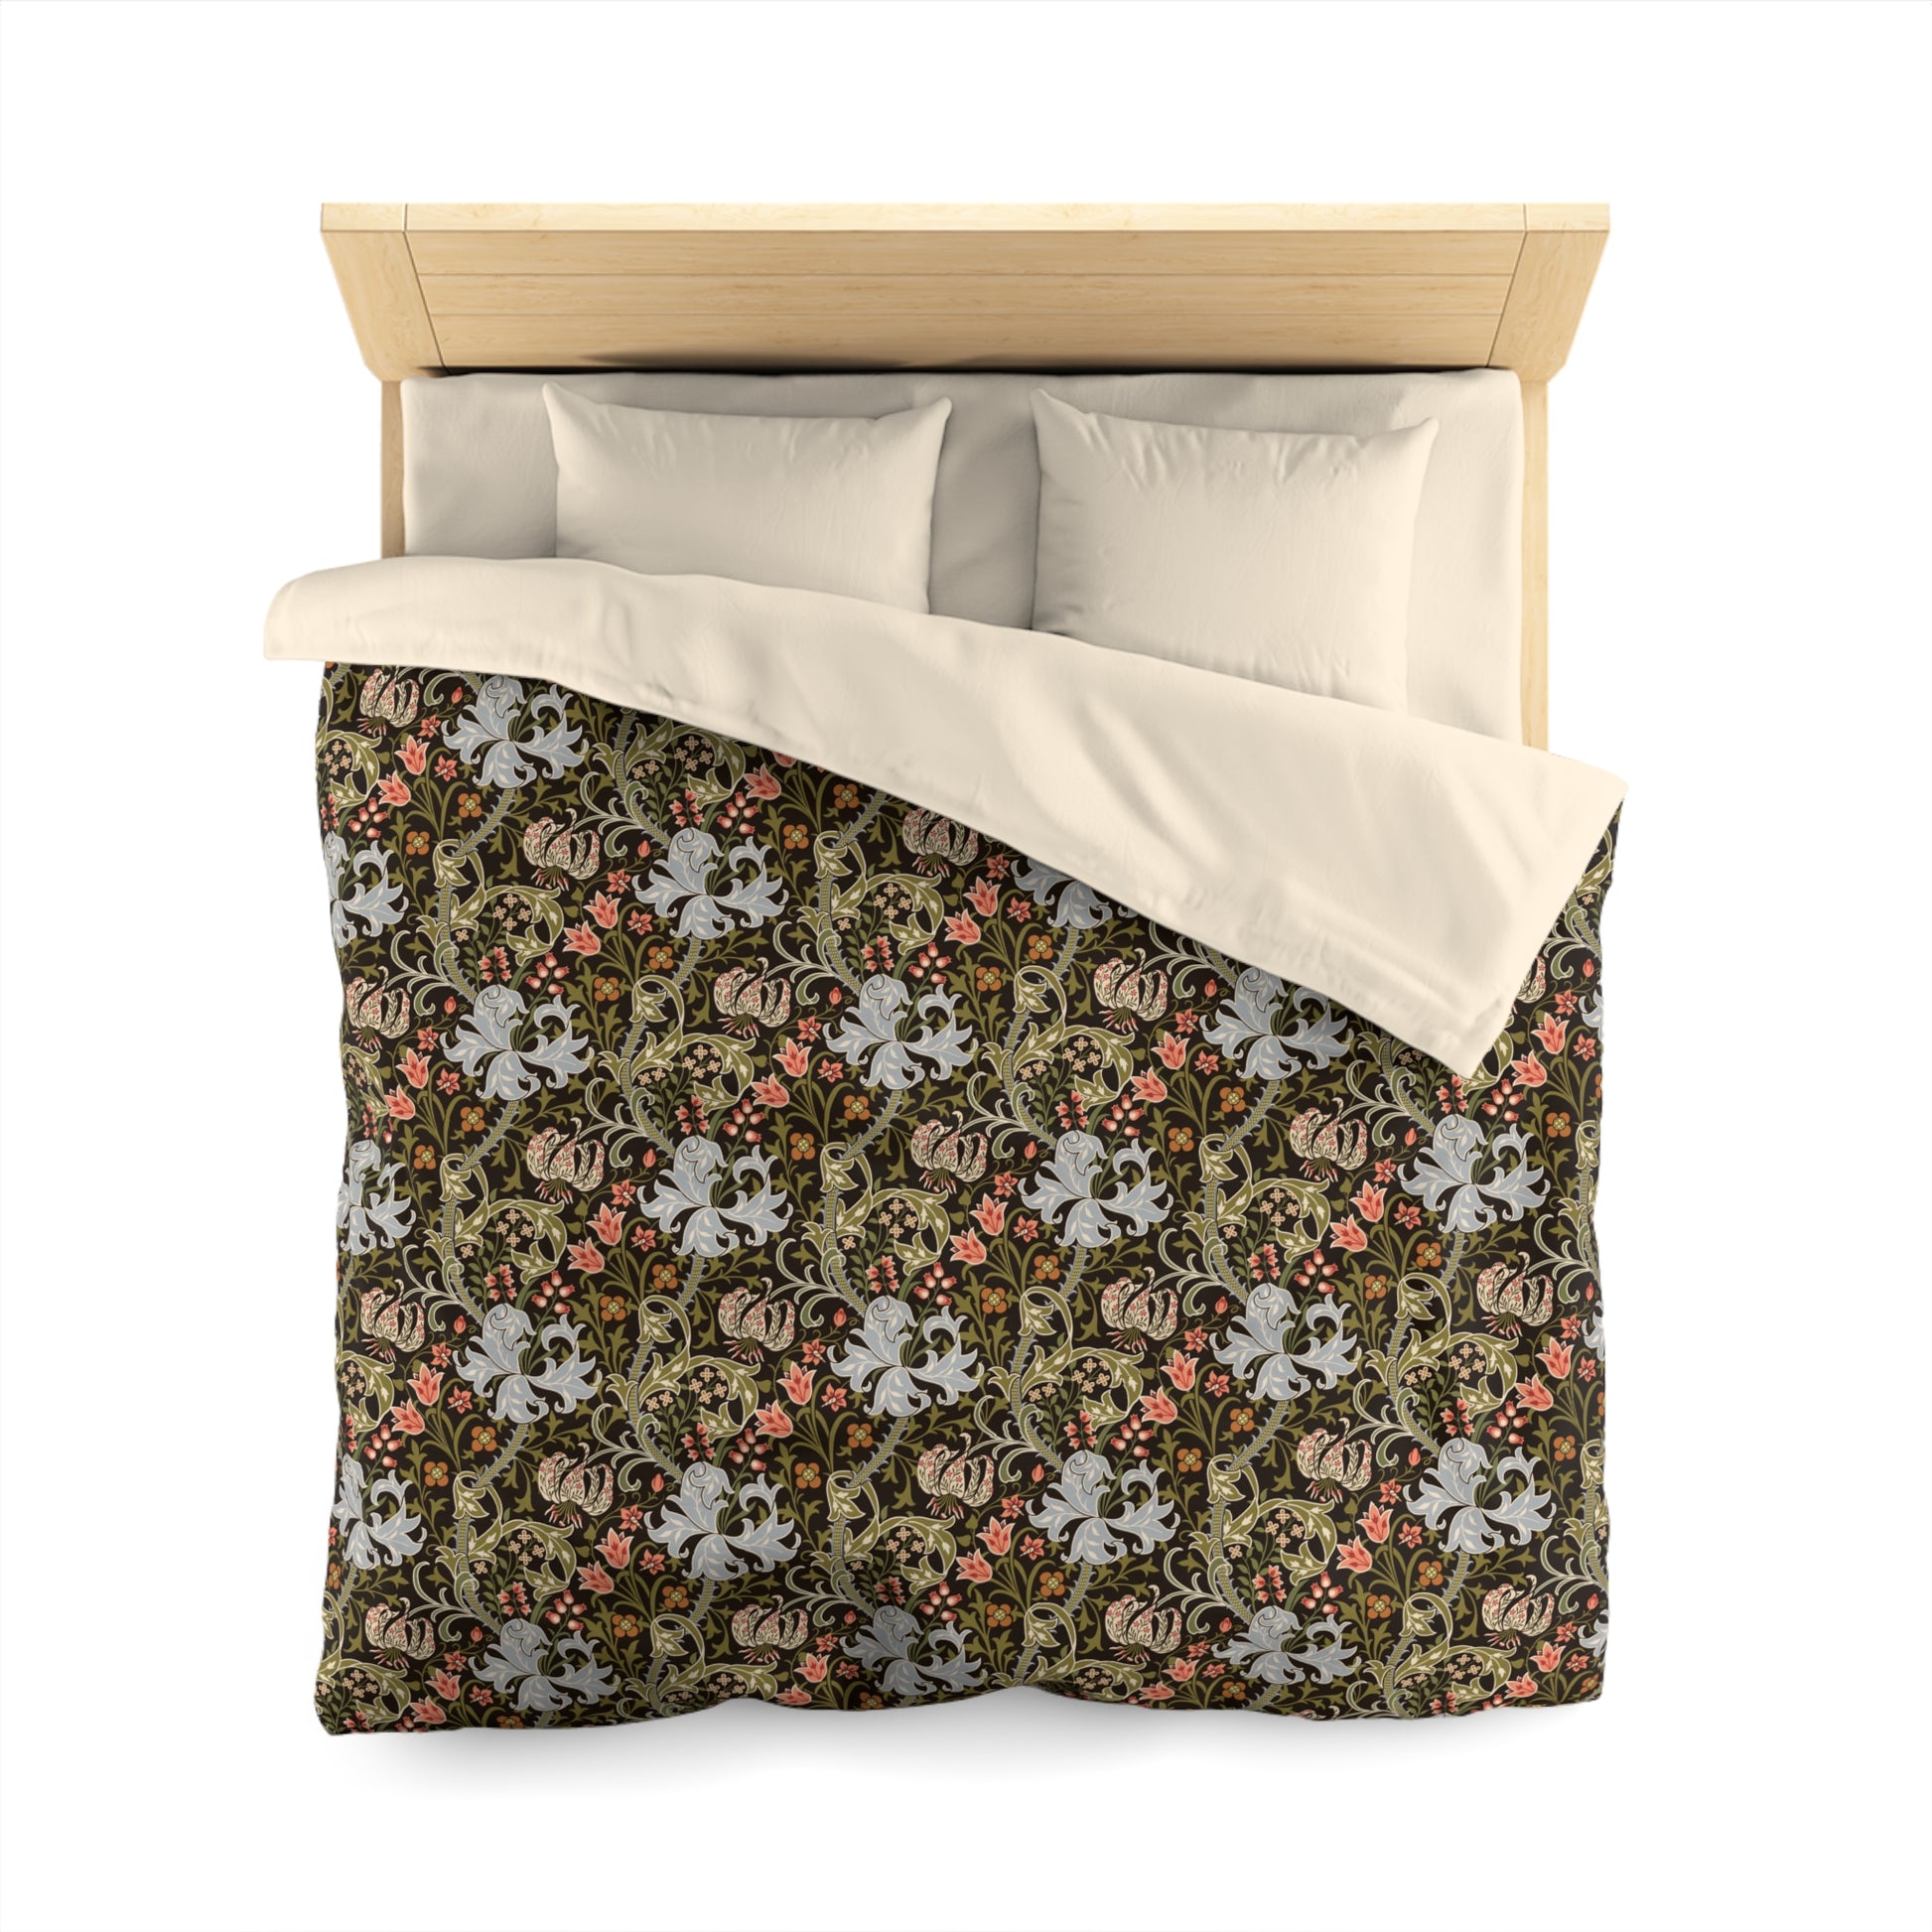 william-morris-co-duvet-cover-golden-lily-collection-midnight-7